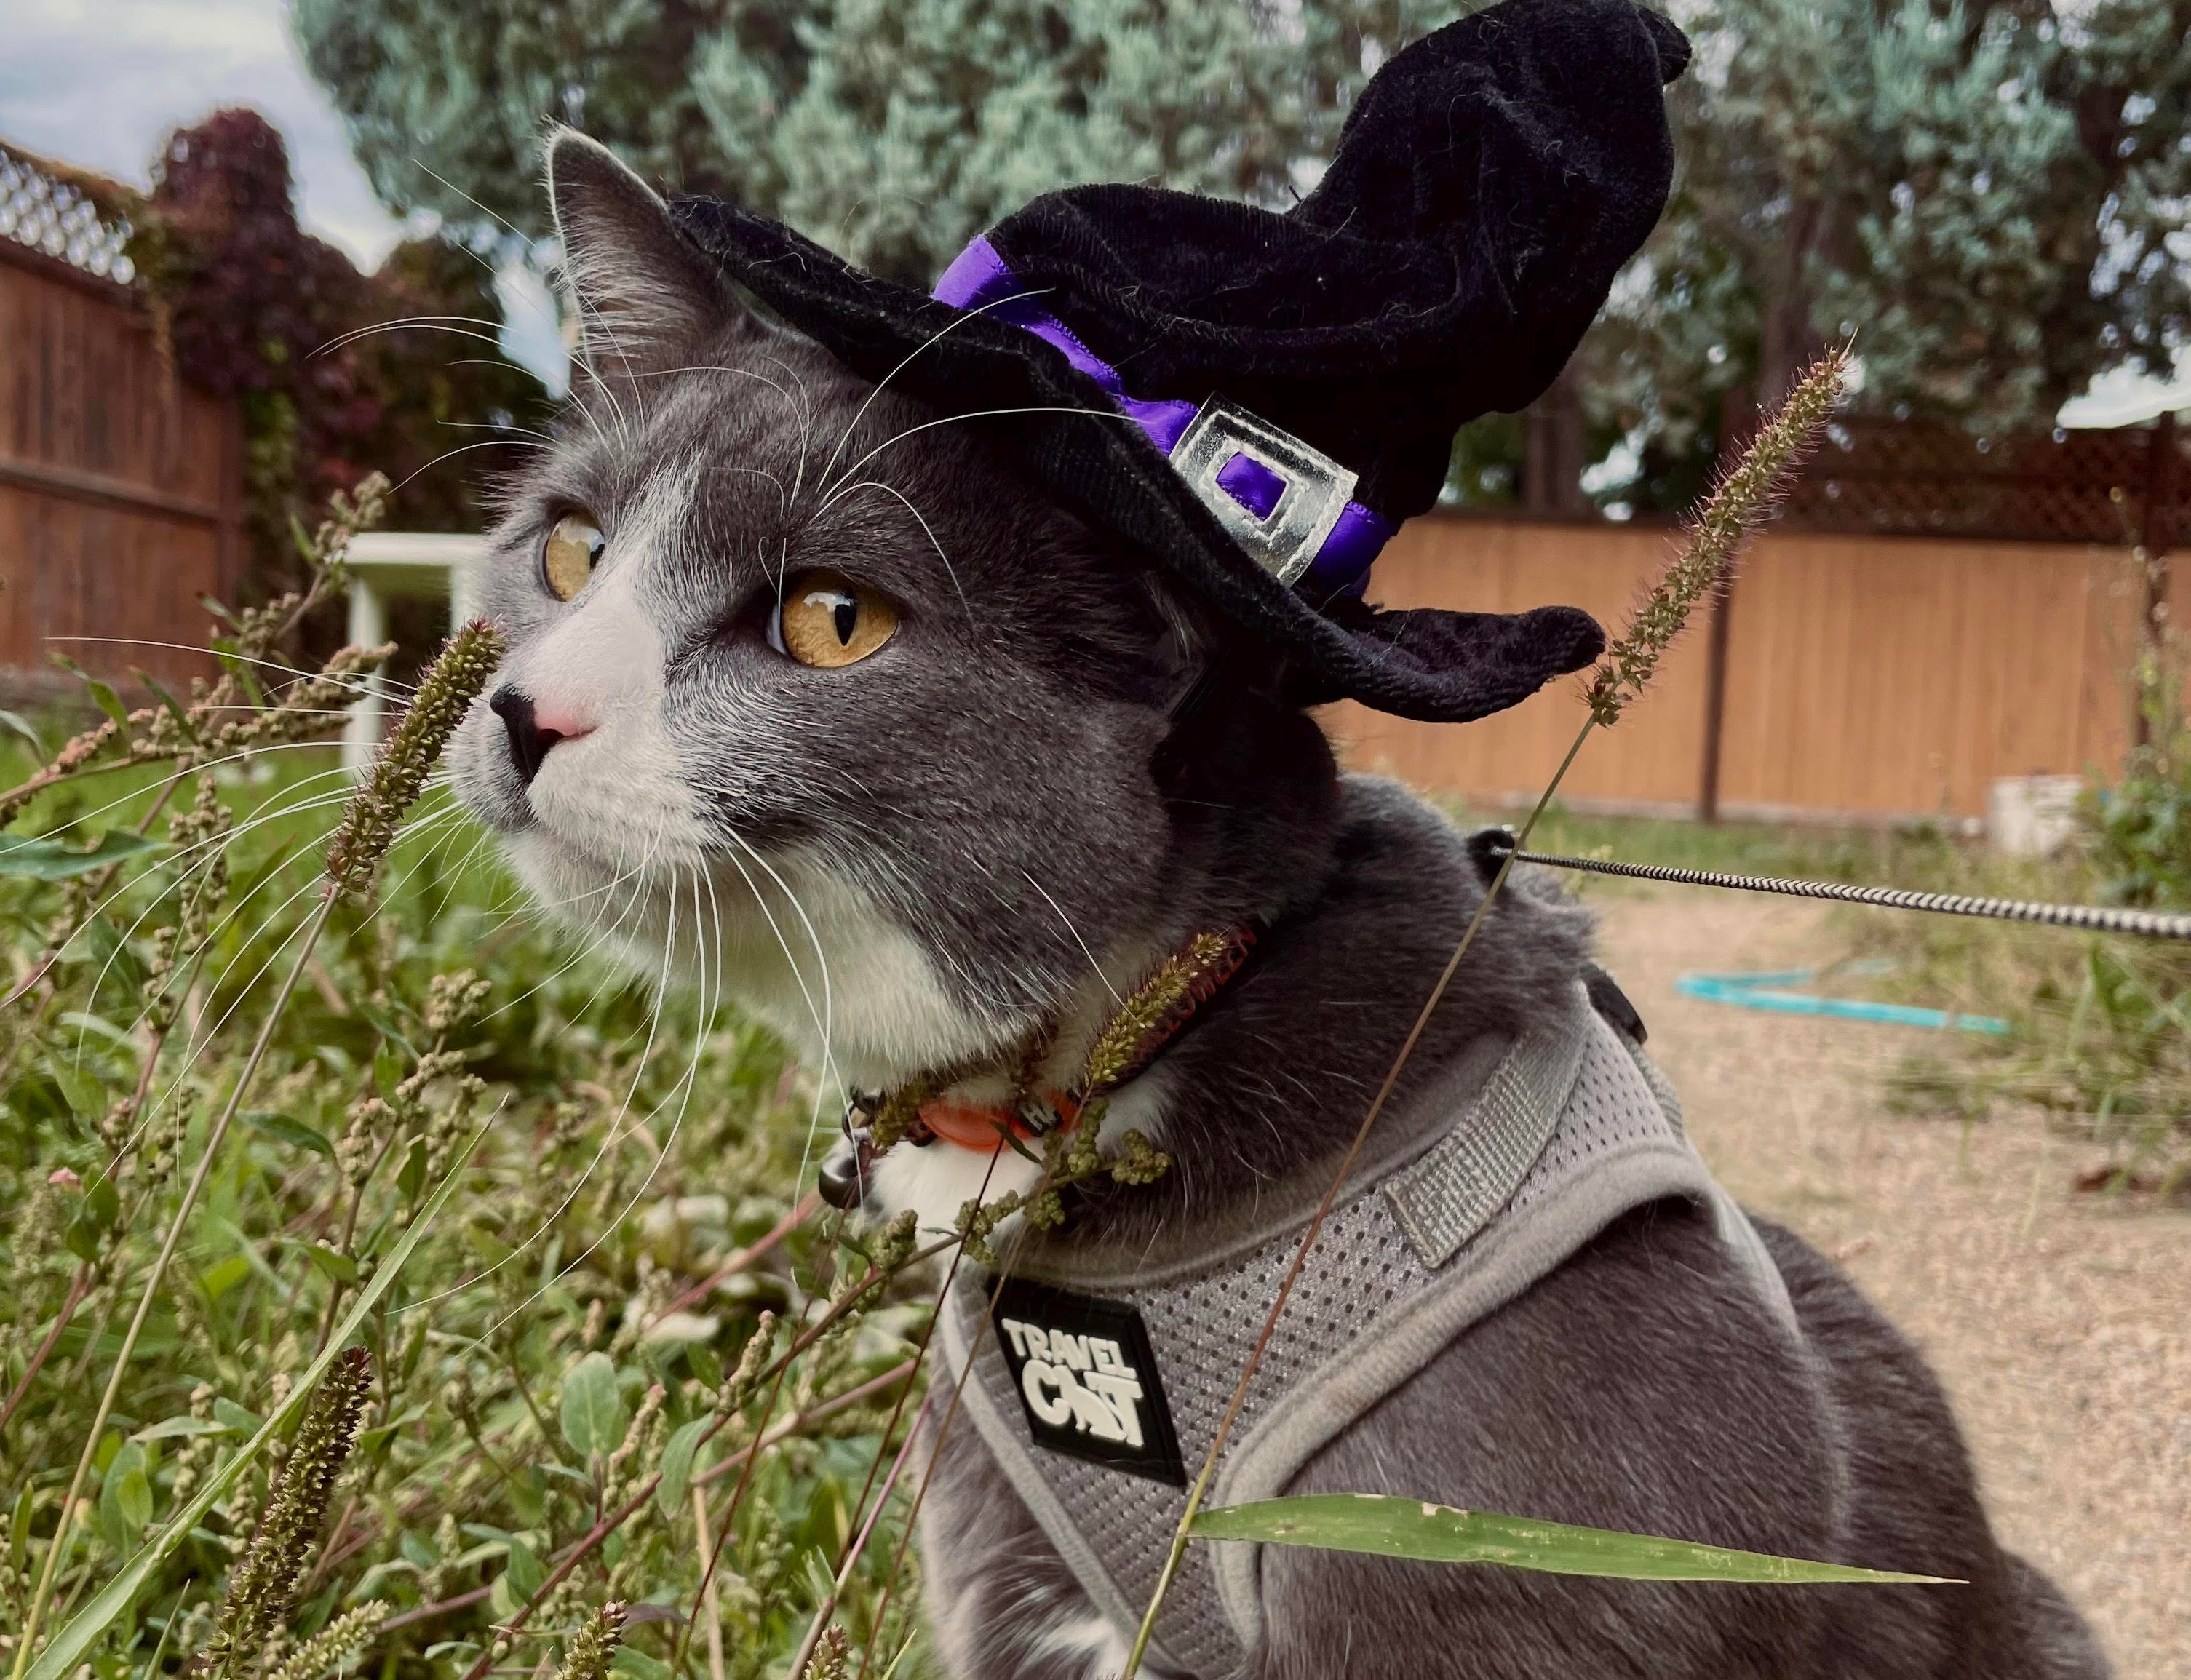 The Cutest Halloween Cats You've Seen this Spooky Season